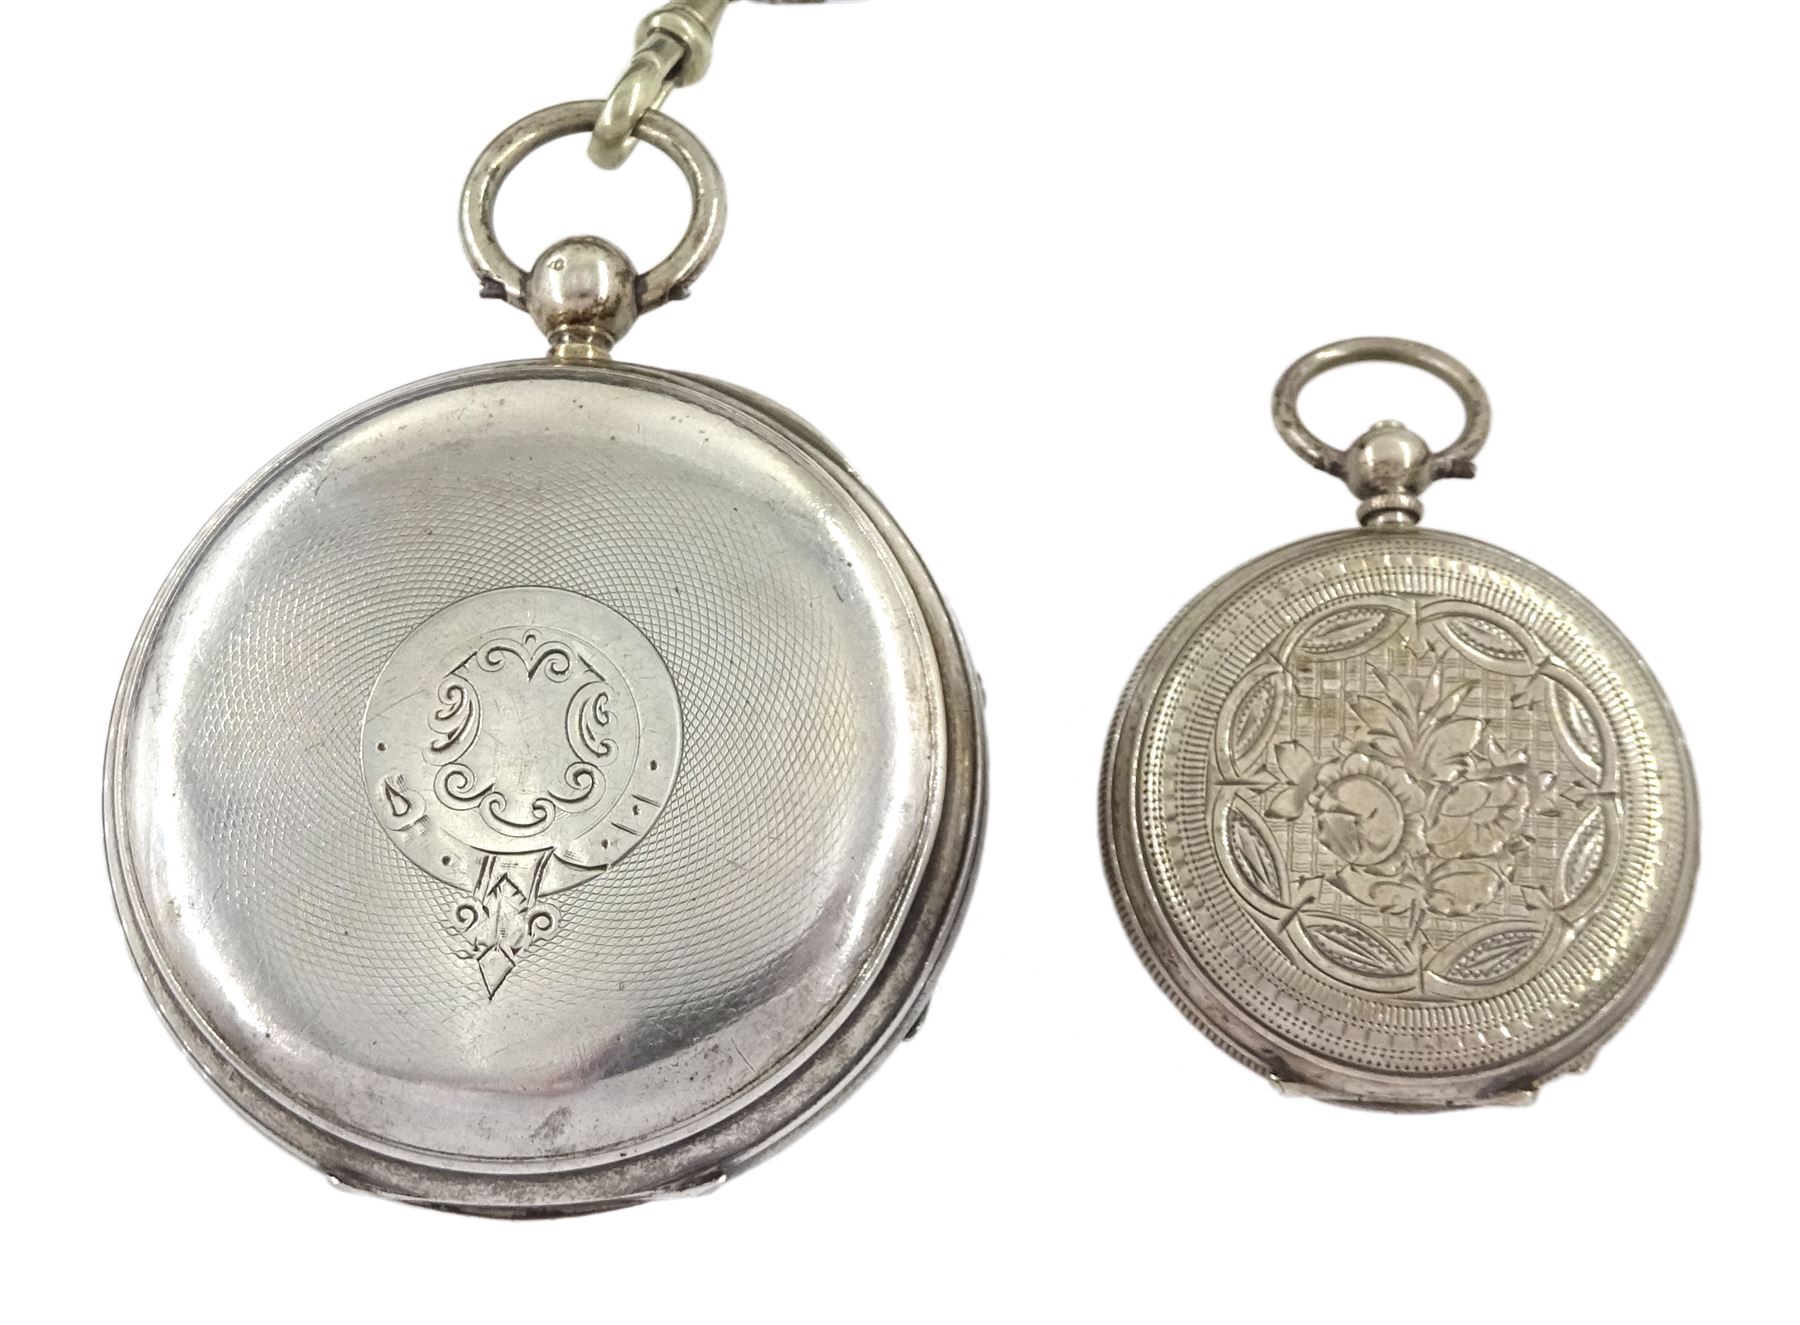 Victorian silver keyless fusee lever pocket watch by Aaronson - Image 3 of 5